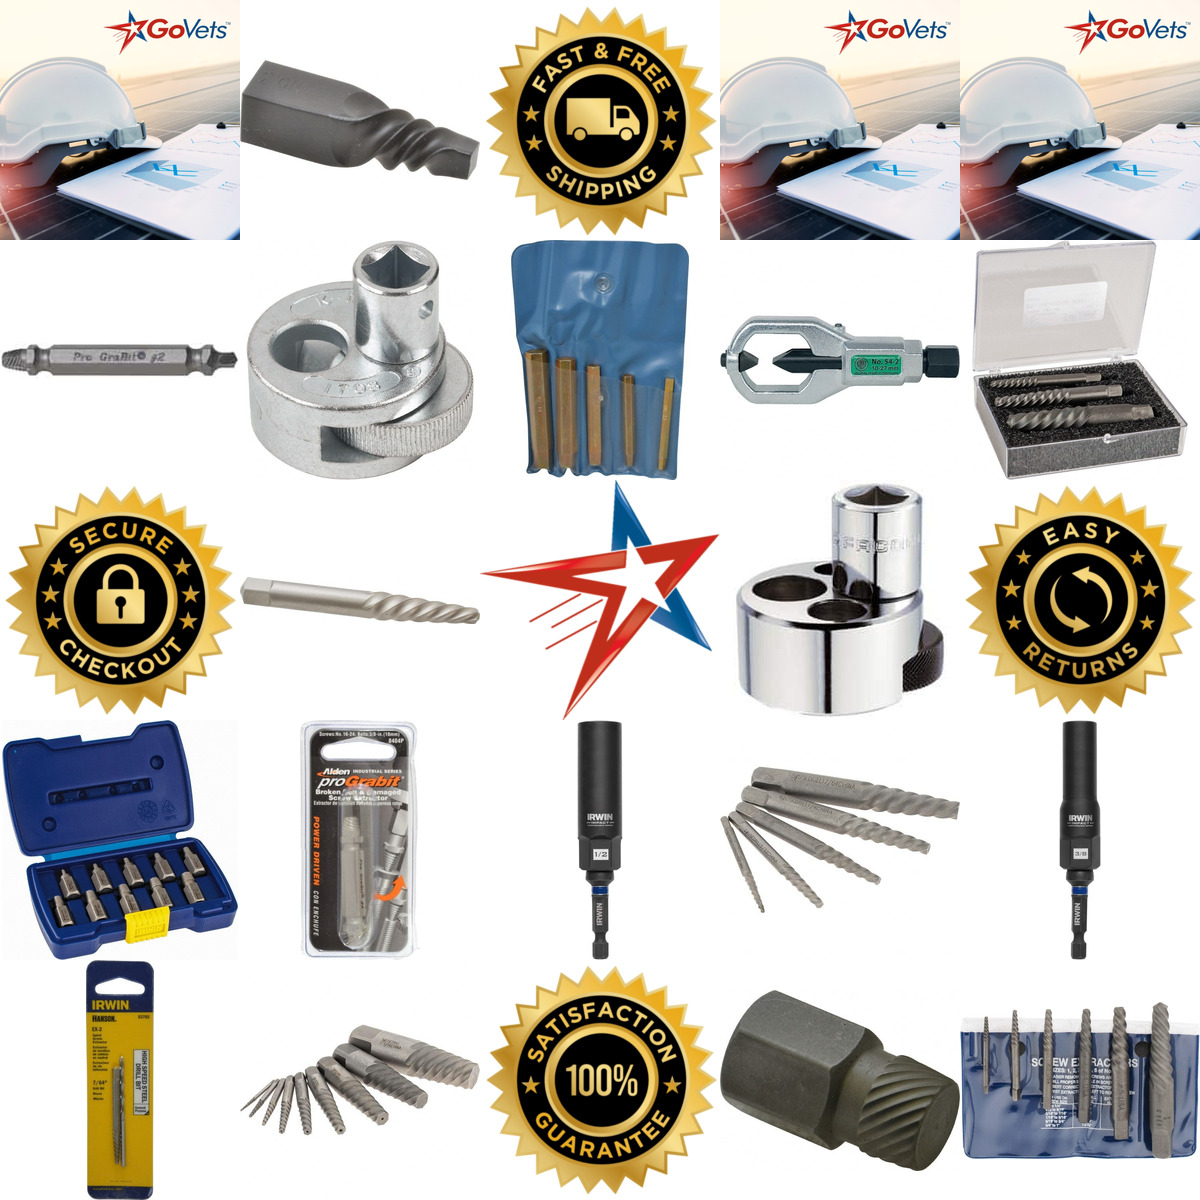 A selection of Bolt Screw and Nut Removers products on GoVets